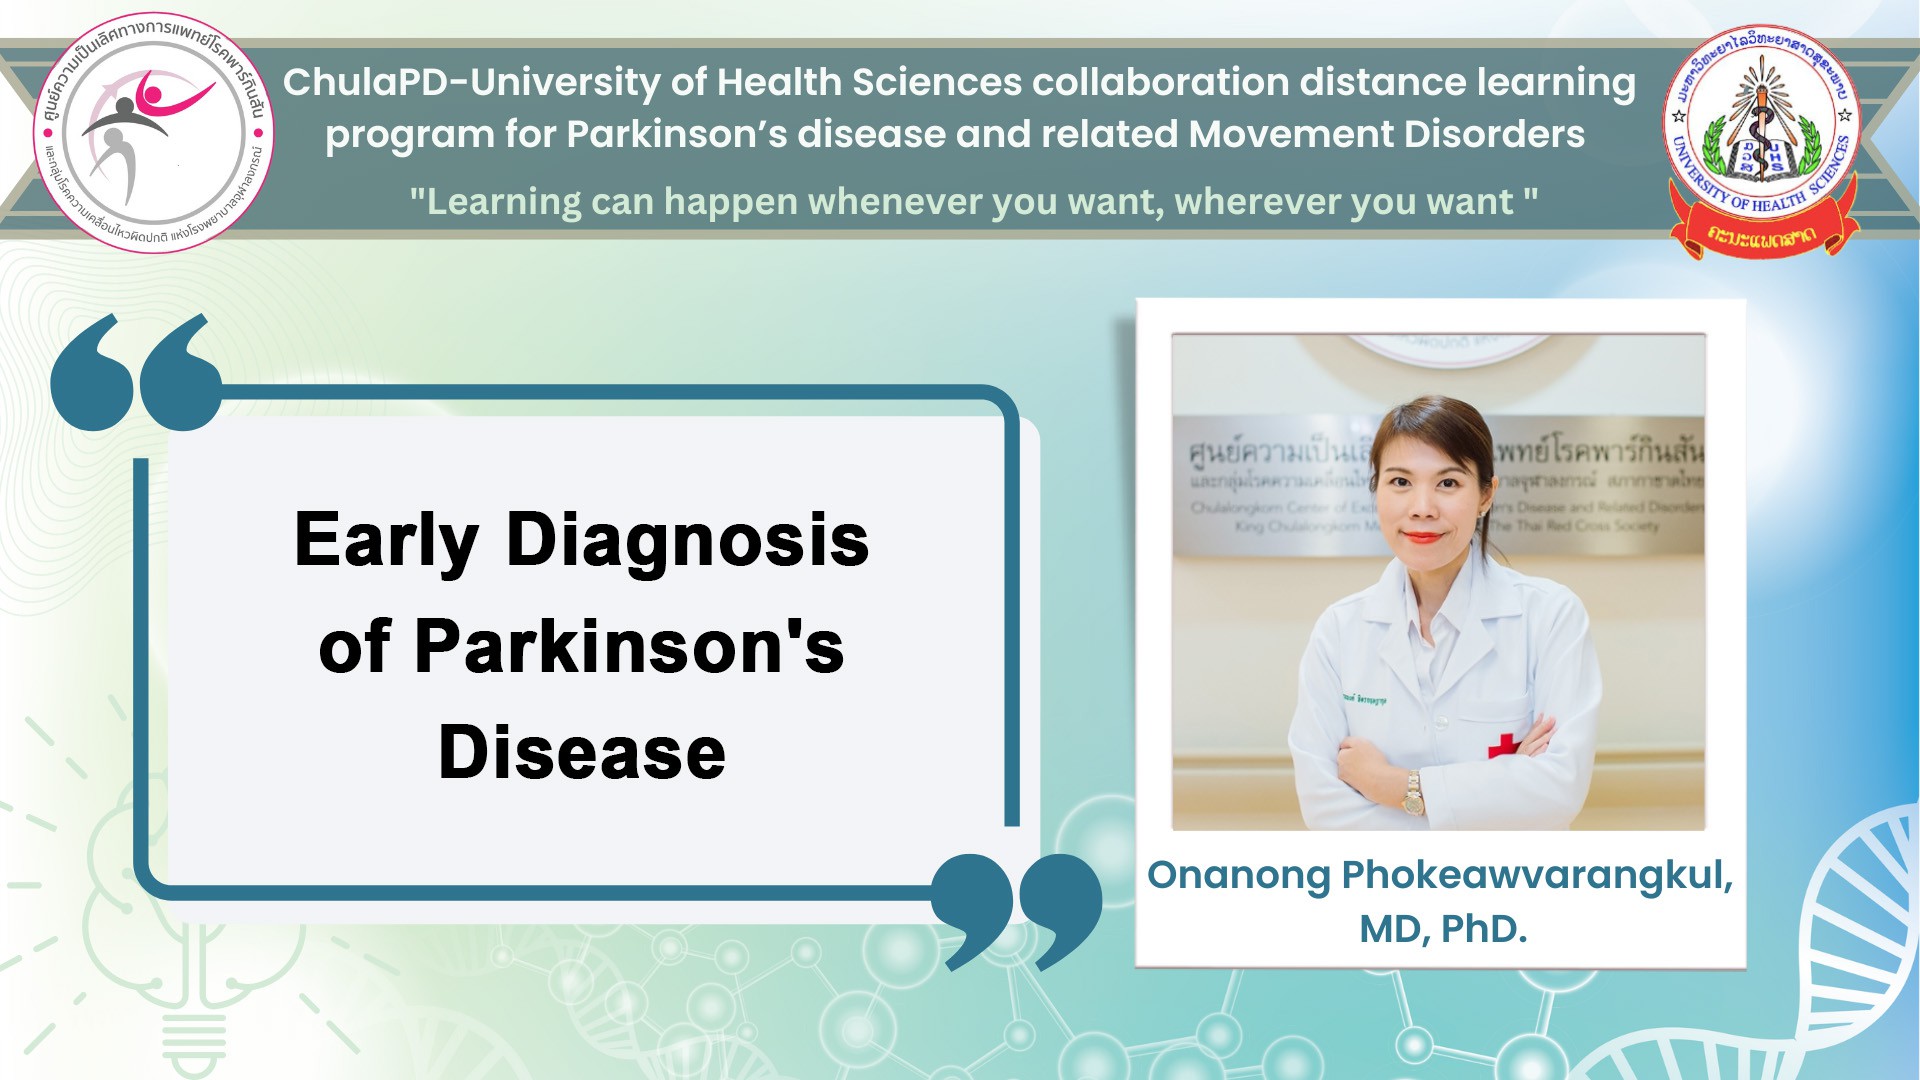 Early diagnosis of Parkinson's disease